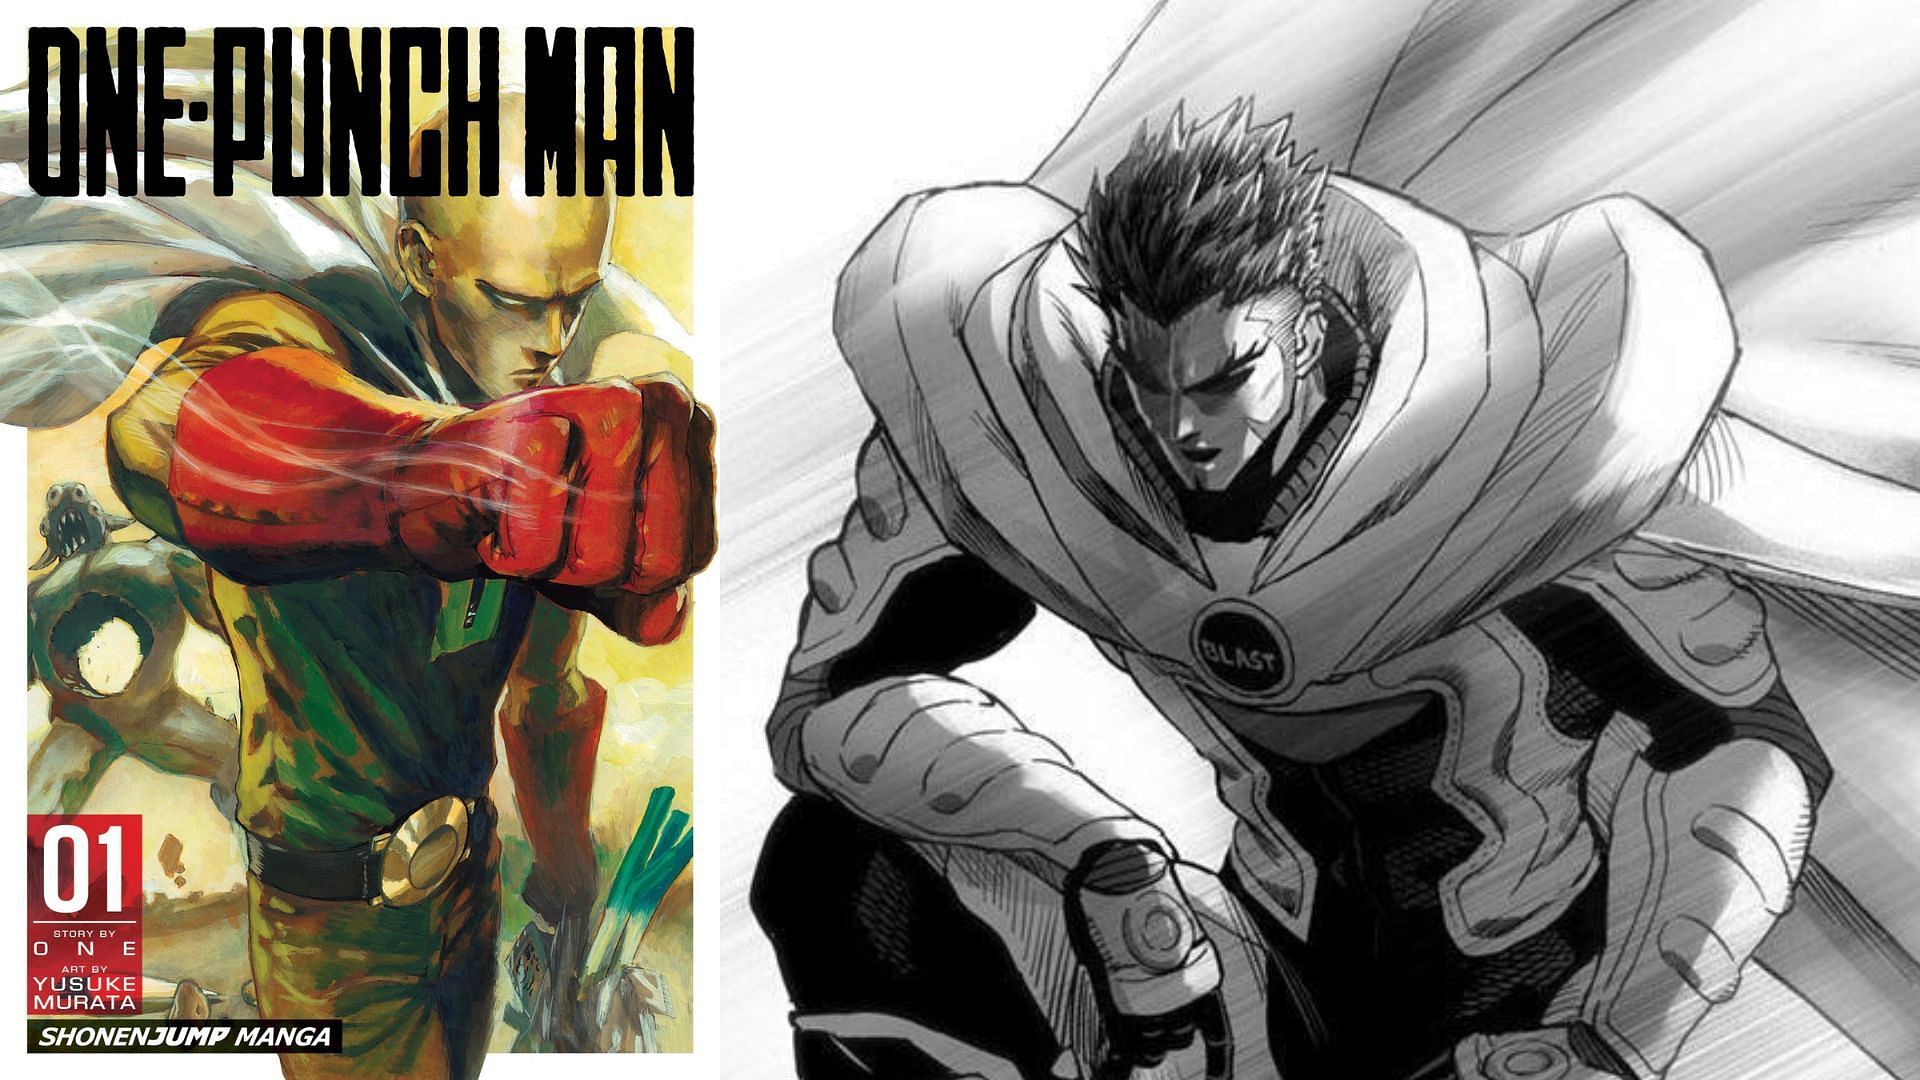 One Punch Man manga cover features Blast in a way no one thought